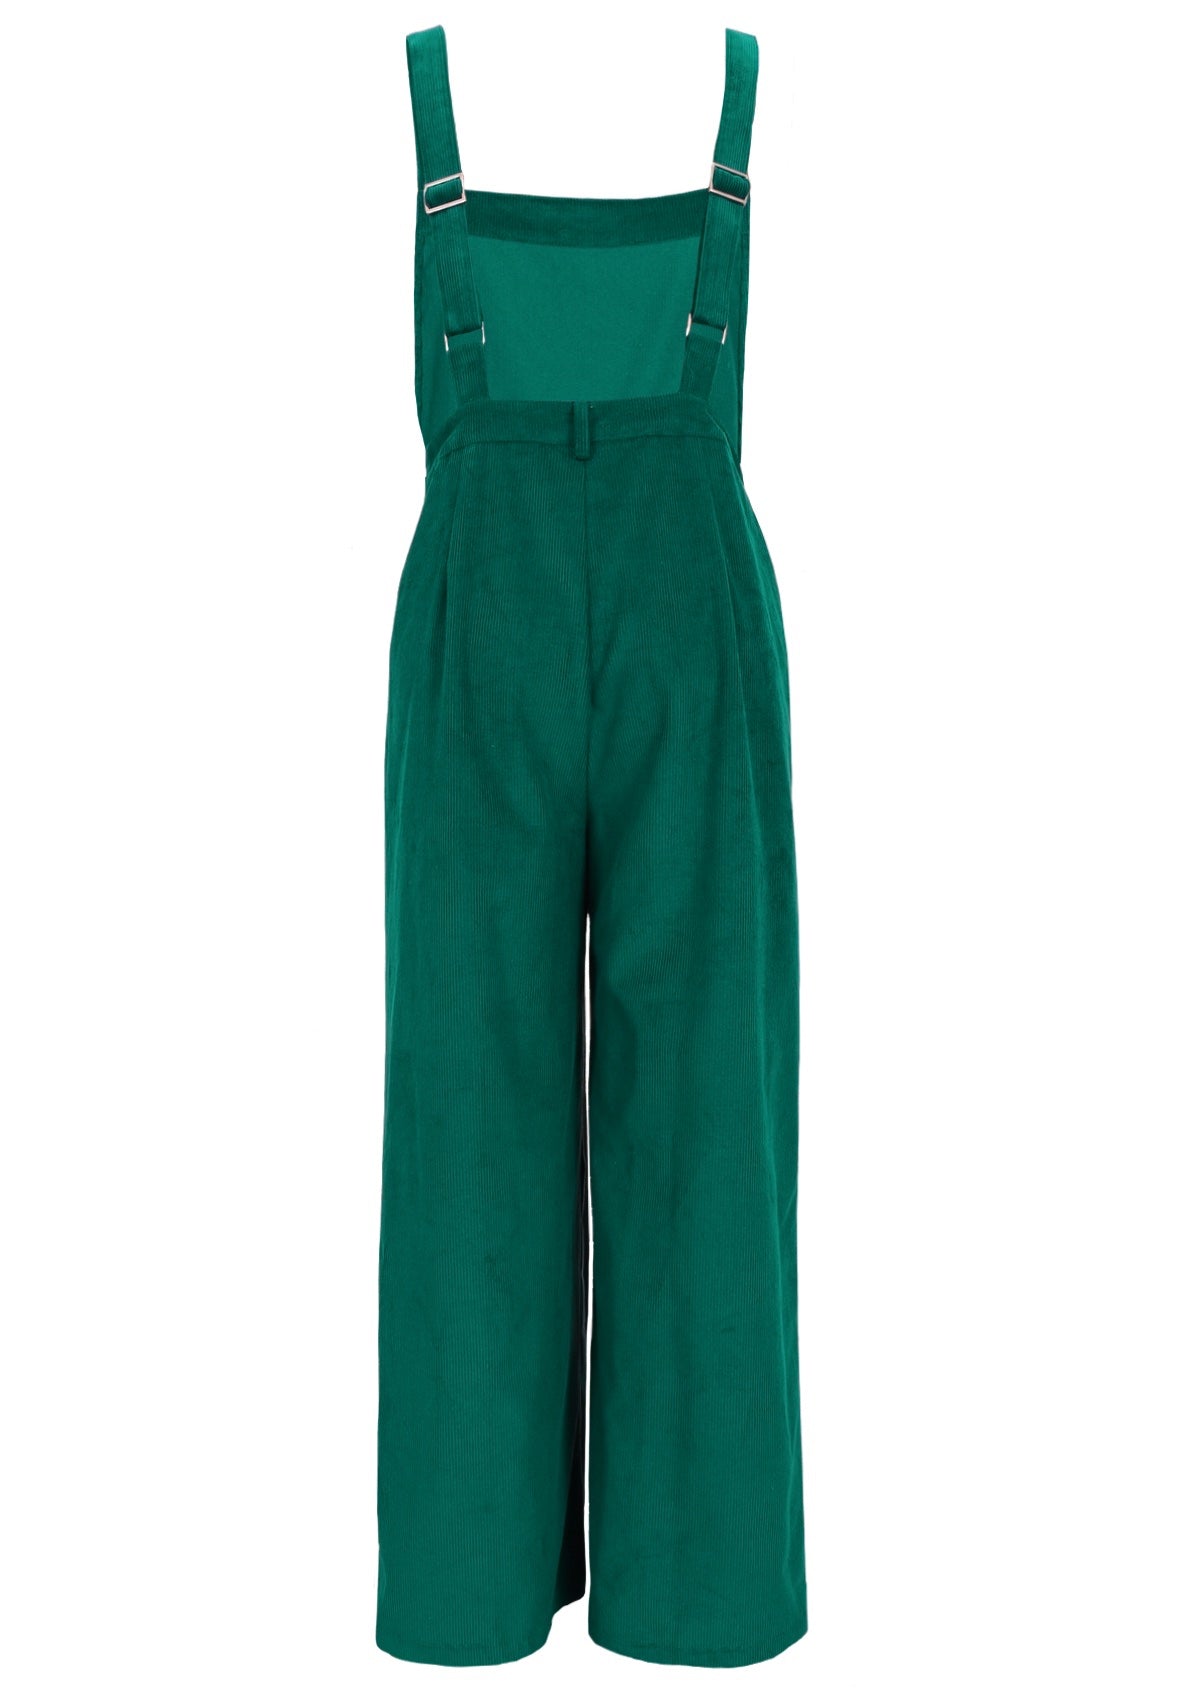 Hunter green cotton overalls with side pockets. 